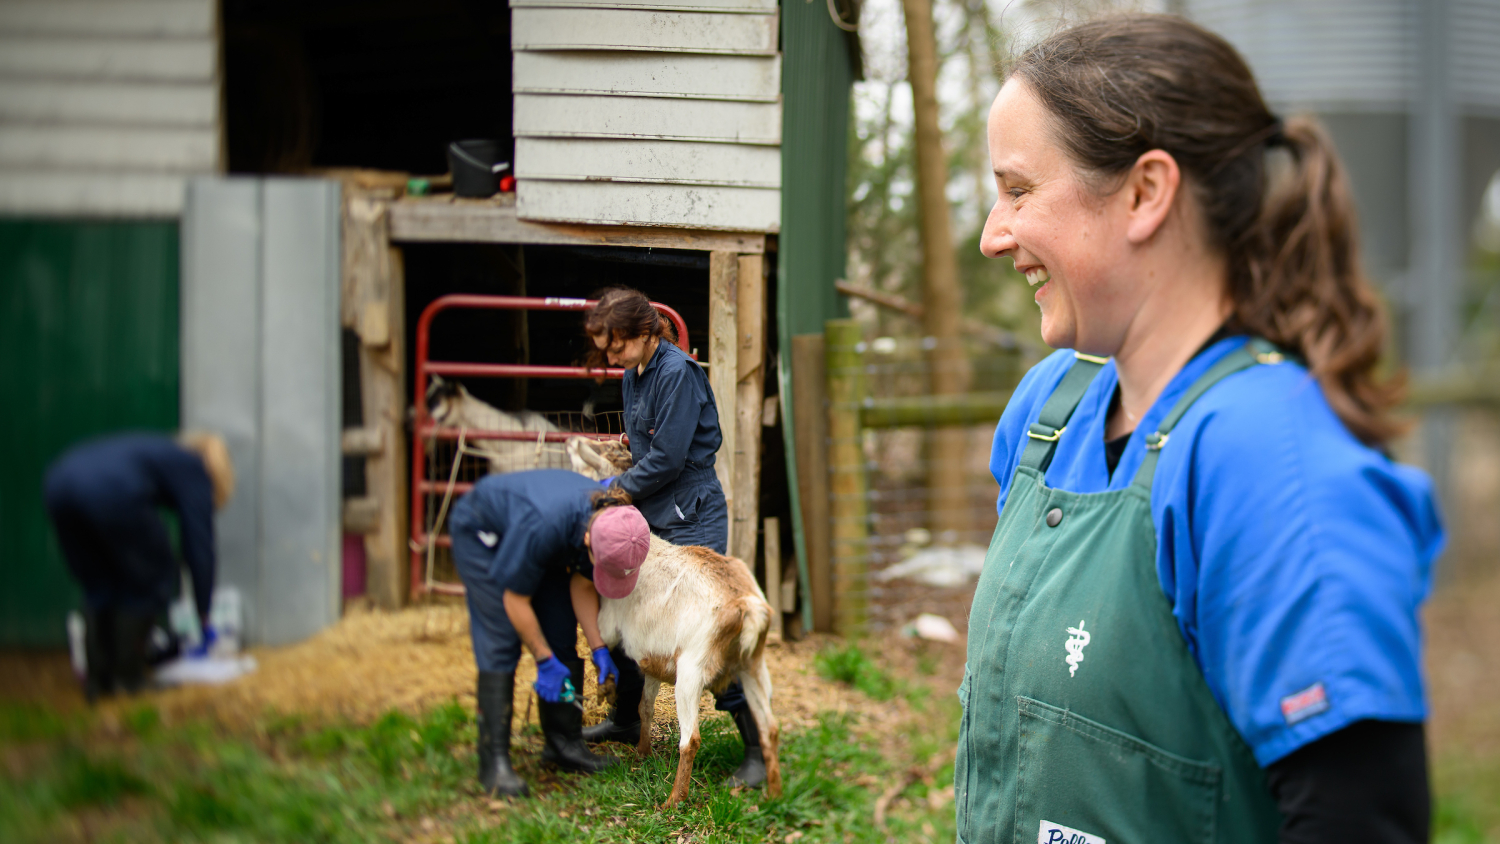 In the right foreground, Dr. Danielle Mzyk smiles at two students working with a goat on a farm.